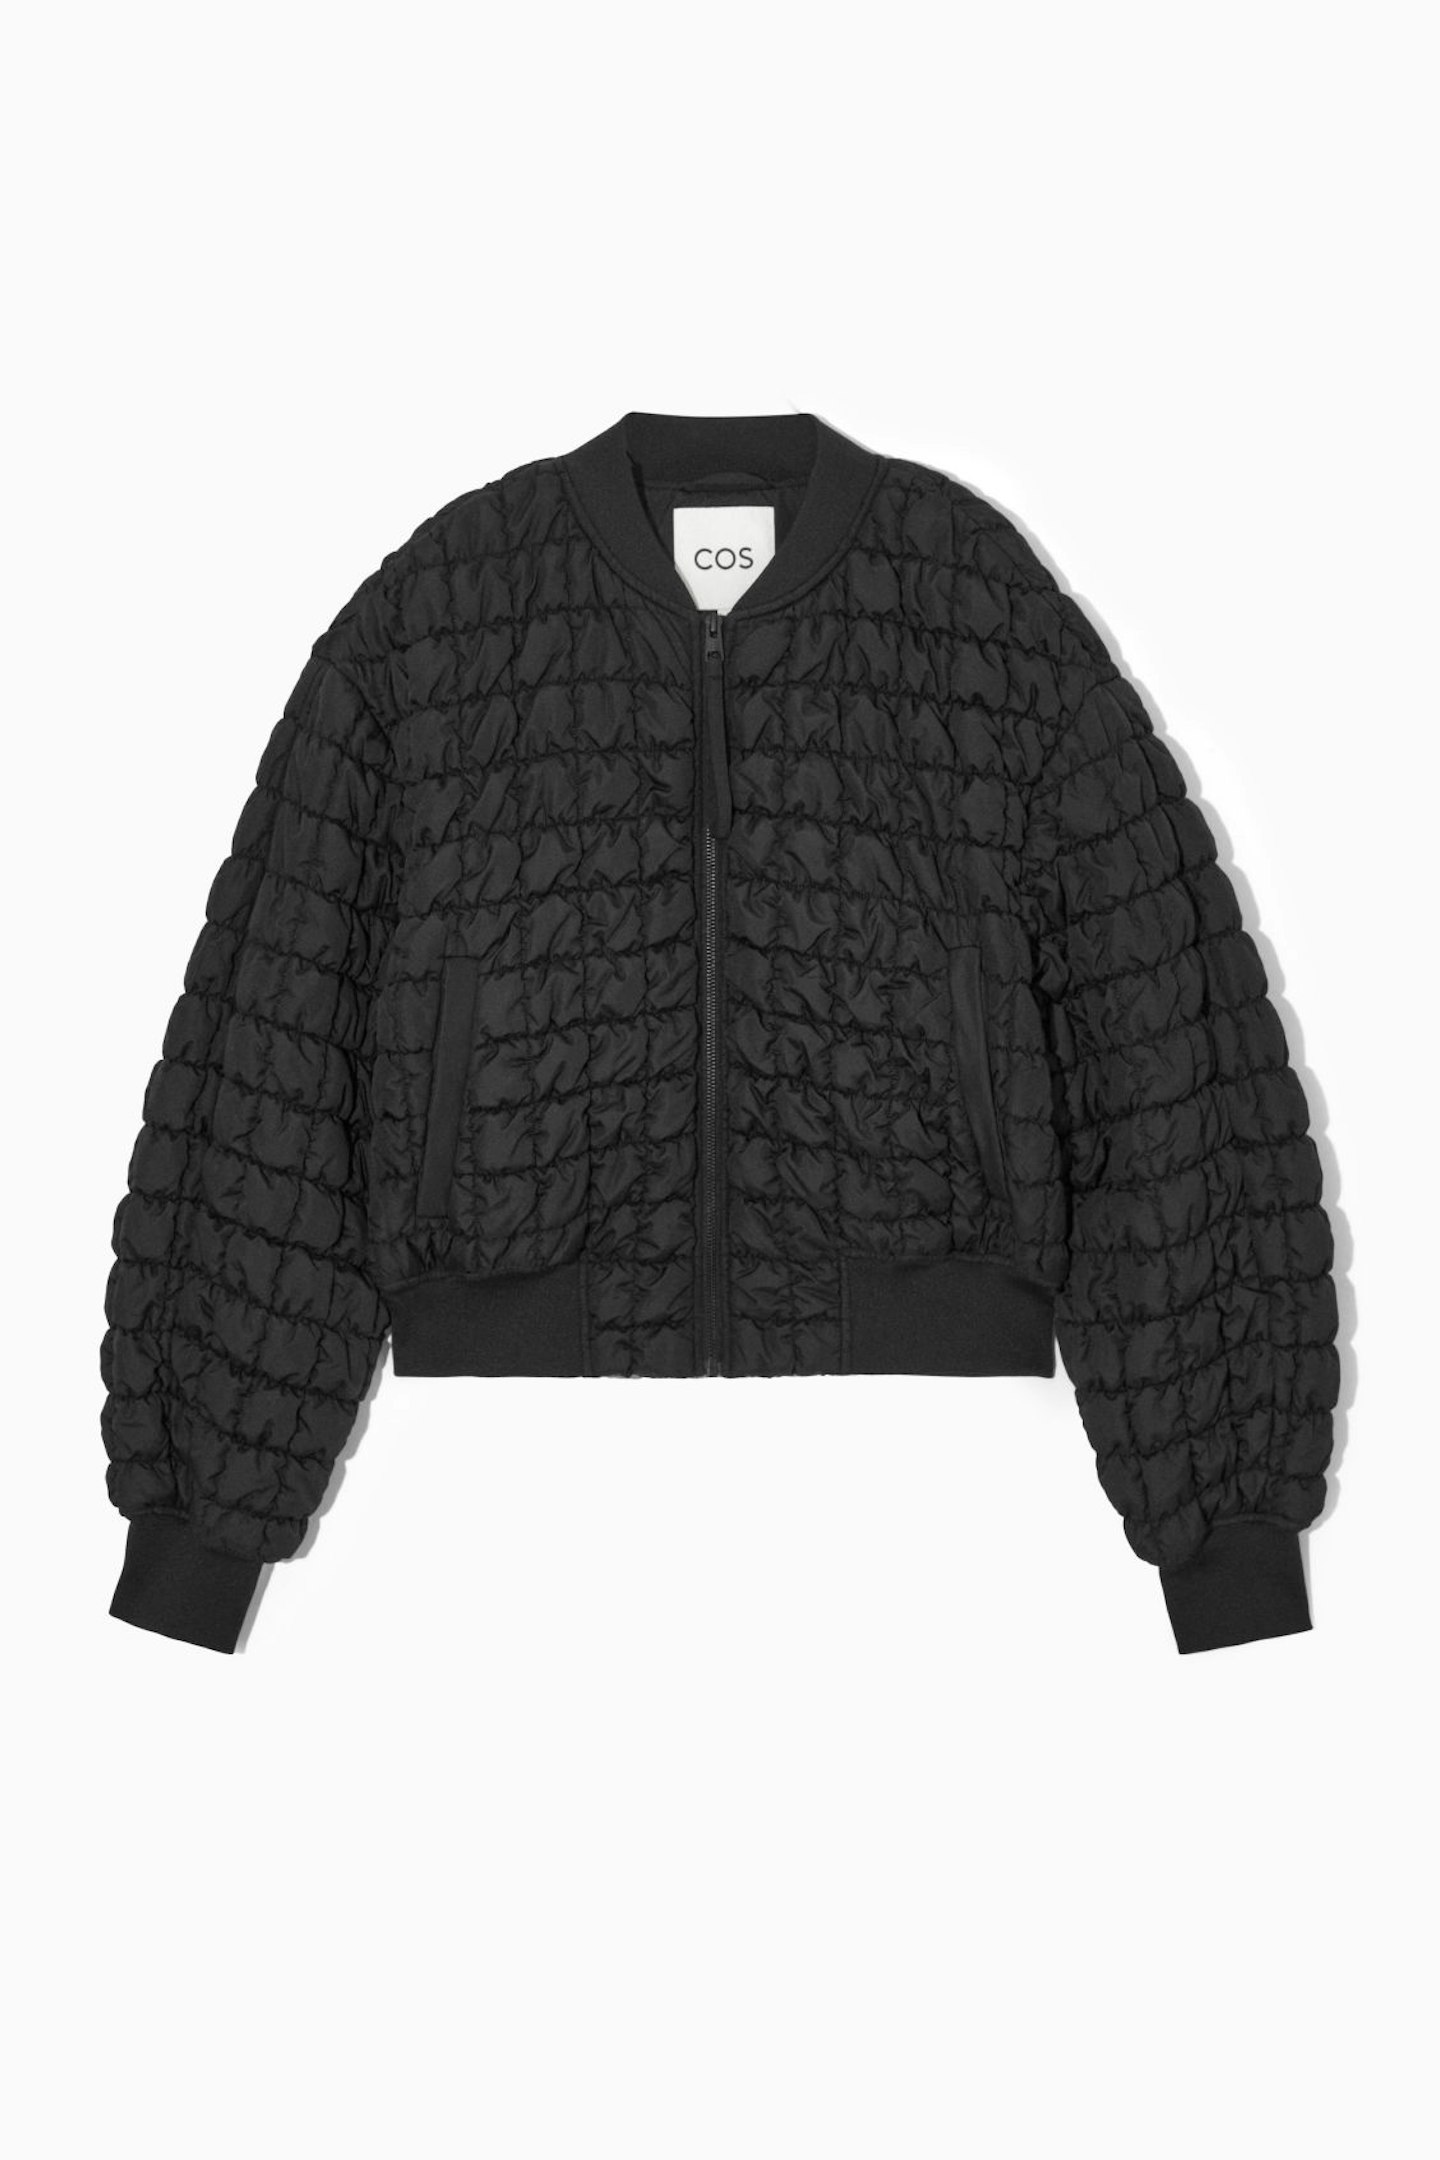 COS quilted jacket